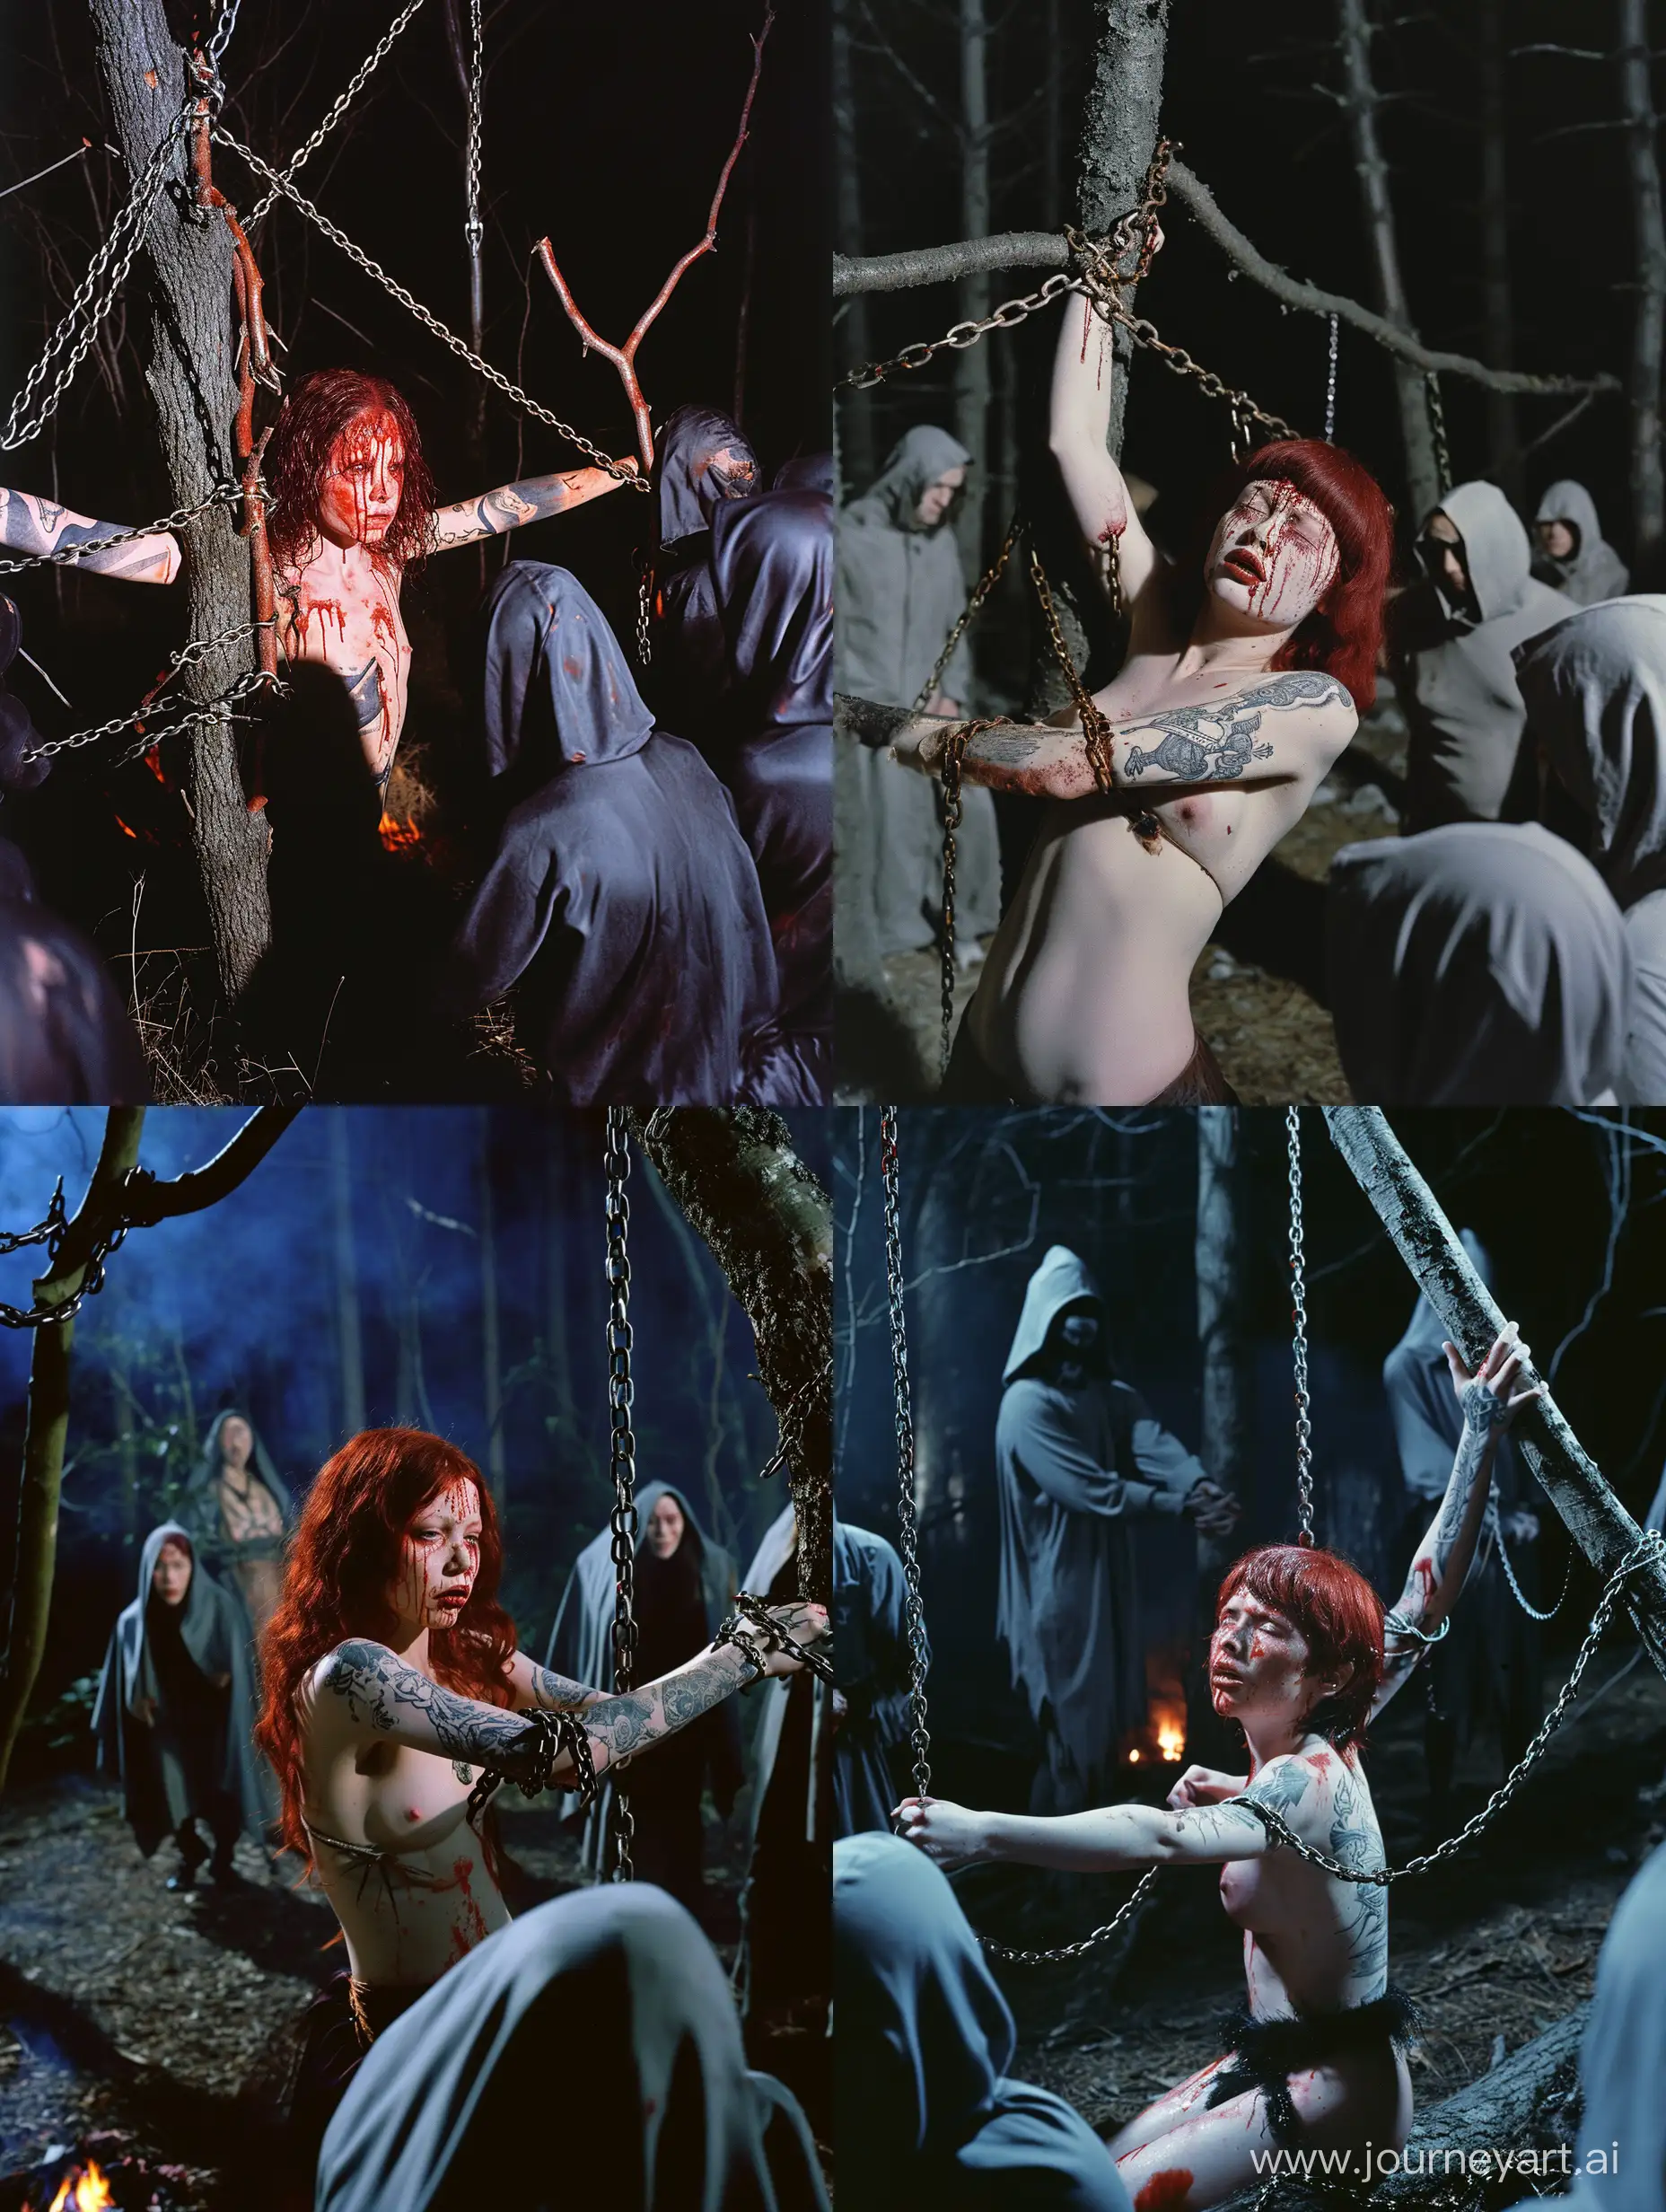 Saturated photo of a beautiful young woman in a minimalistic forest, an ominous and unsettling scene unfolds, tear-stained face, crimson red hair, body adorned with ominous tattoos, proportionate body, accurate anatomy, detailed face, Her arms, stretched open and bound to tree branches, chains tightly securing her in a vulnerable position, while hooded figures, with no visible faces, gather around her, participating in a mysterious and unsettling ritual. The photo is captured using Fujifilm Provia film, enhancing the vividness of colors and contrasts, as the night scene is illuminated by a flickering campfire, casting eerie shadows, adding to the sense of foreboding. The forest serves as the backdrop for this hike core ritual, its minimalistic beauty contrasting with the intensity of the scene, creating a chilling ambiance that evokes both fascination and unease. Unlikely collaborators: Marina Abramović, the performance artist exploring the limits of the body, Sally Mann, the photographer capturing haunting and introspective images, Gareth Pugh, the fashion designer known for his dark and theatrical aesthetics, Ari Aster, the filmmaker specializing in atmospheric and disturbing narratives, David Tibet, the musician and artist delving into esoteric and ritualistic themes